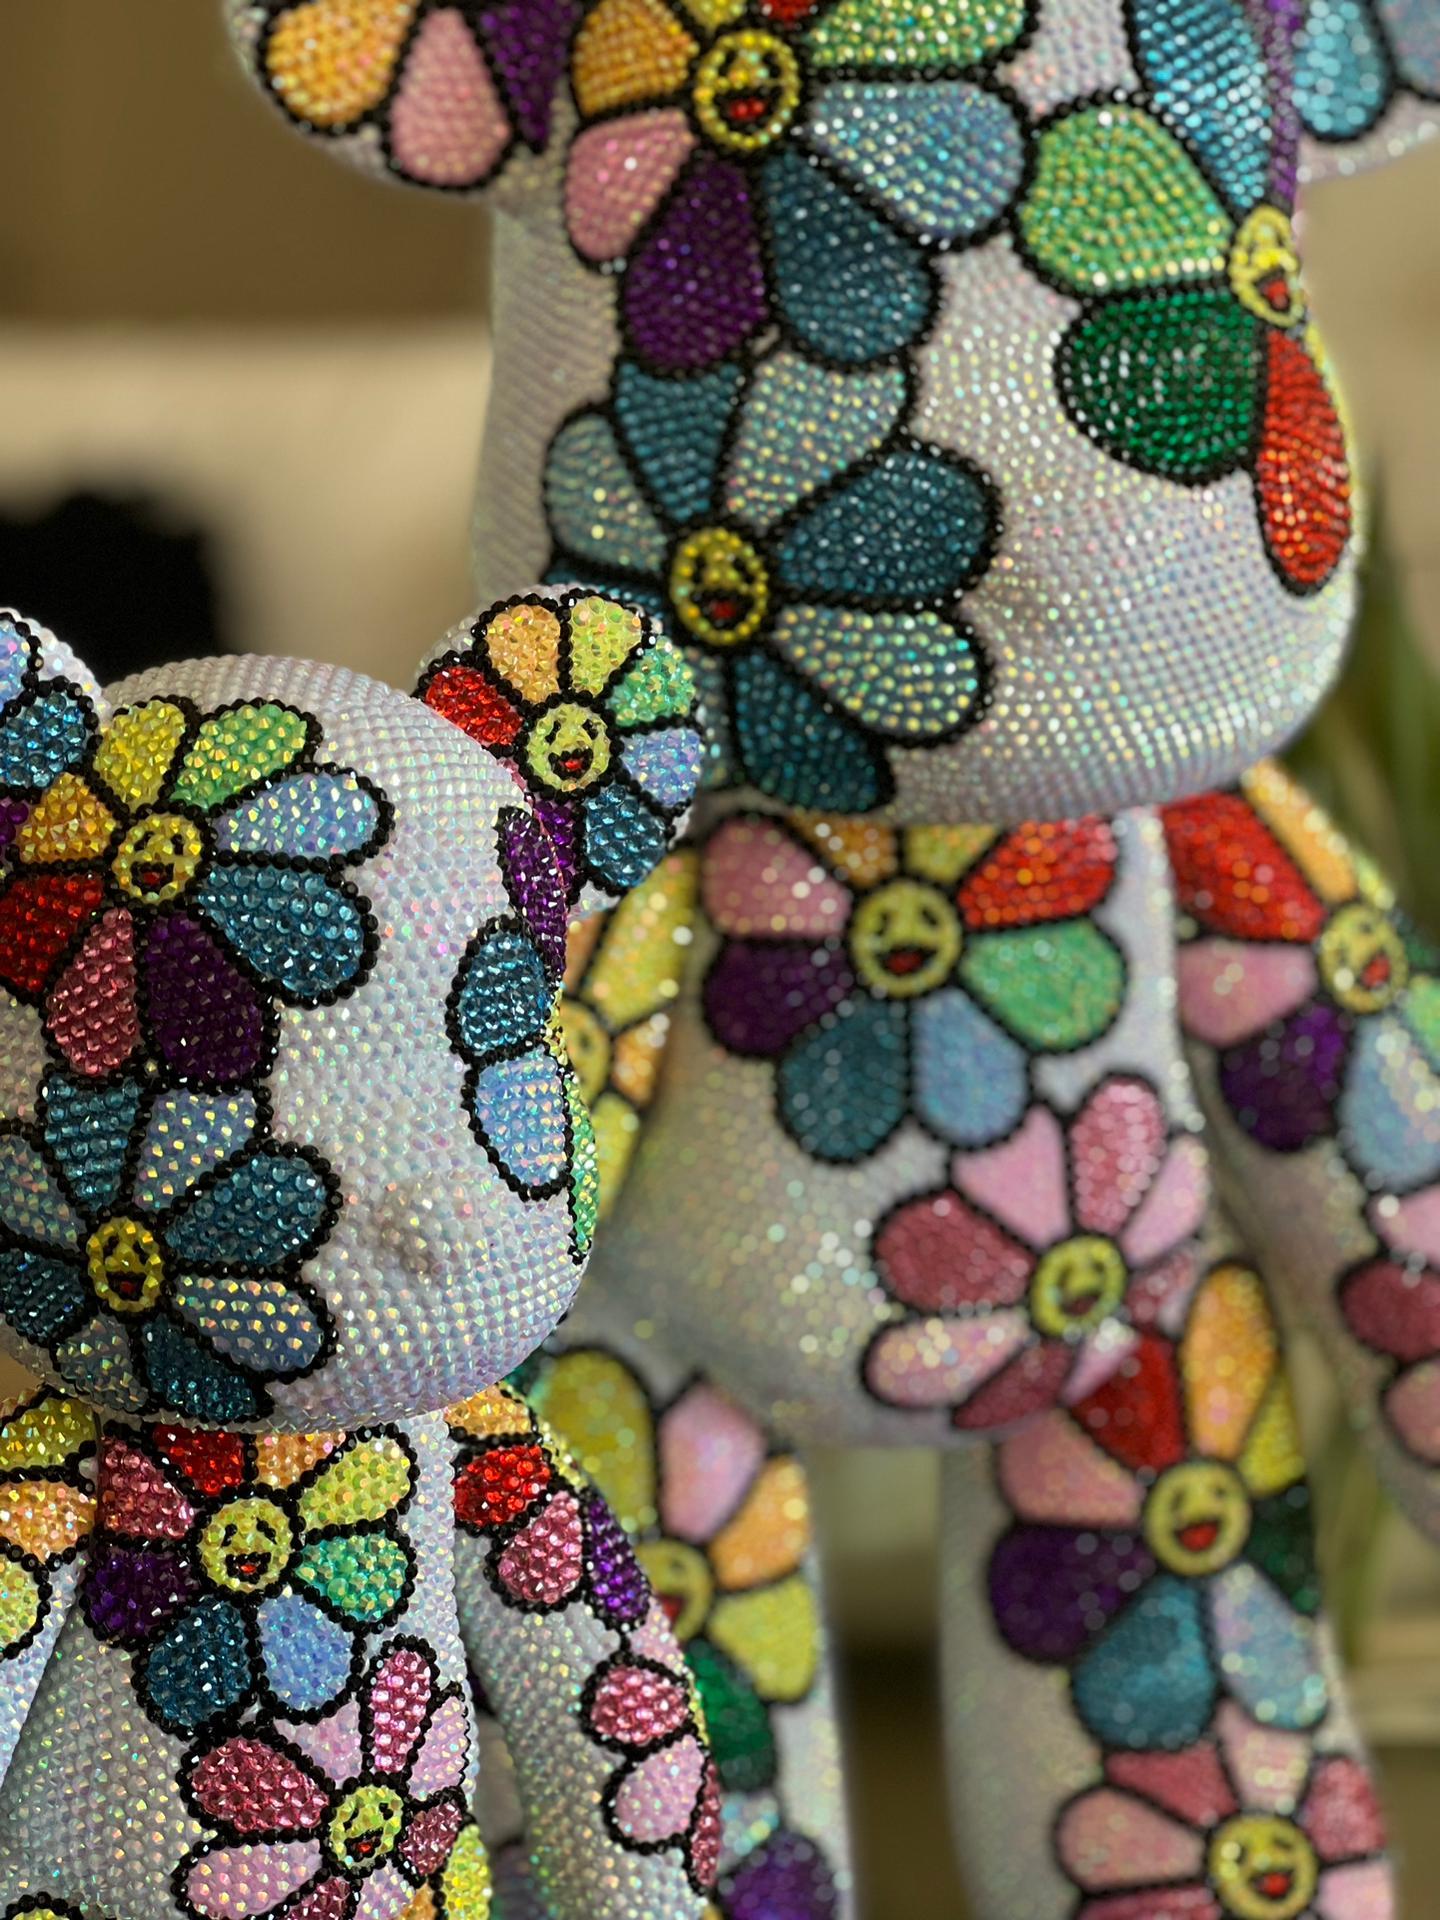 Medium: Resin, Acrylic Paint & Rhinestone Crystals.

Edition: Limited edition of 8 semi identical bears 
Additional information: NFT of the Blooming bear included 

Information: Juliana Del Burgo, artistically known as ‘Burgo’, was born in Cascais,